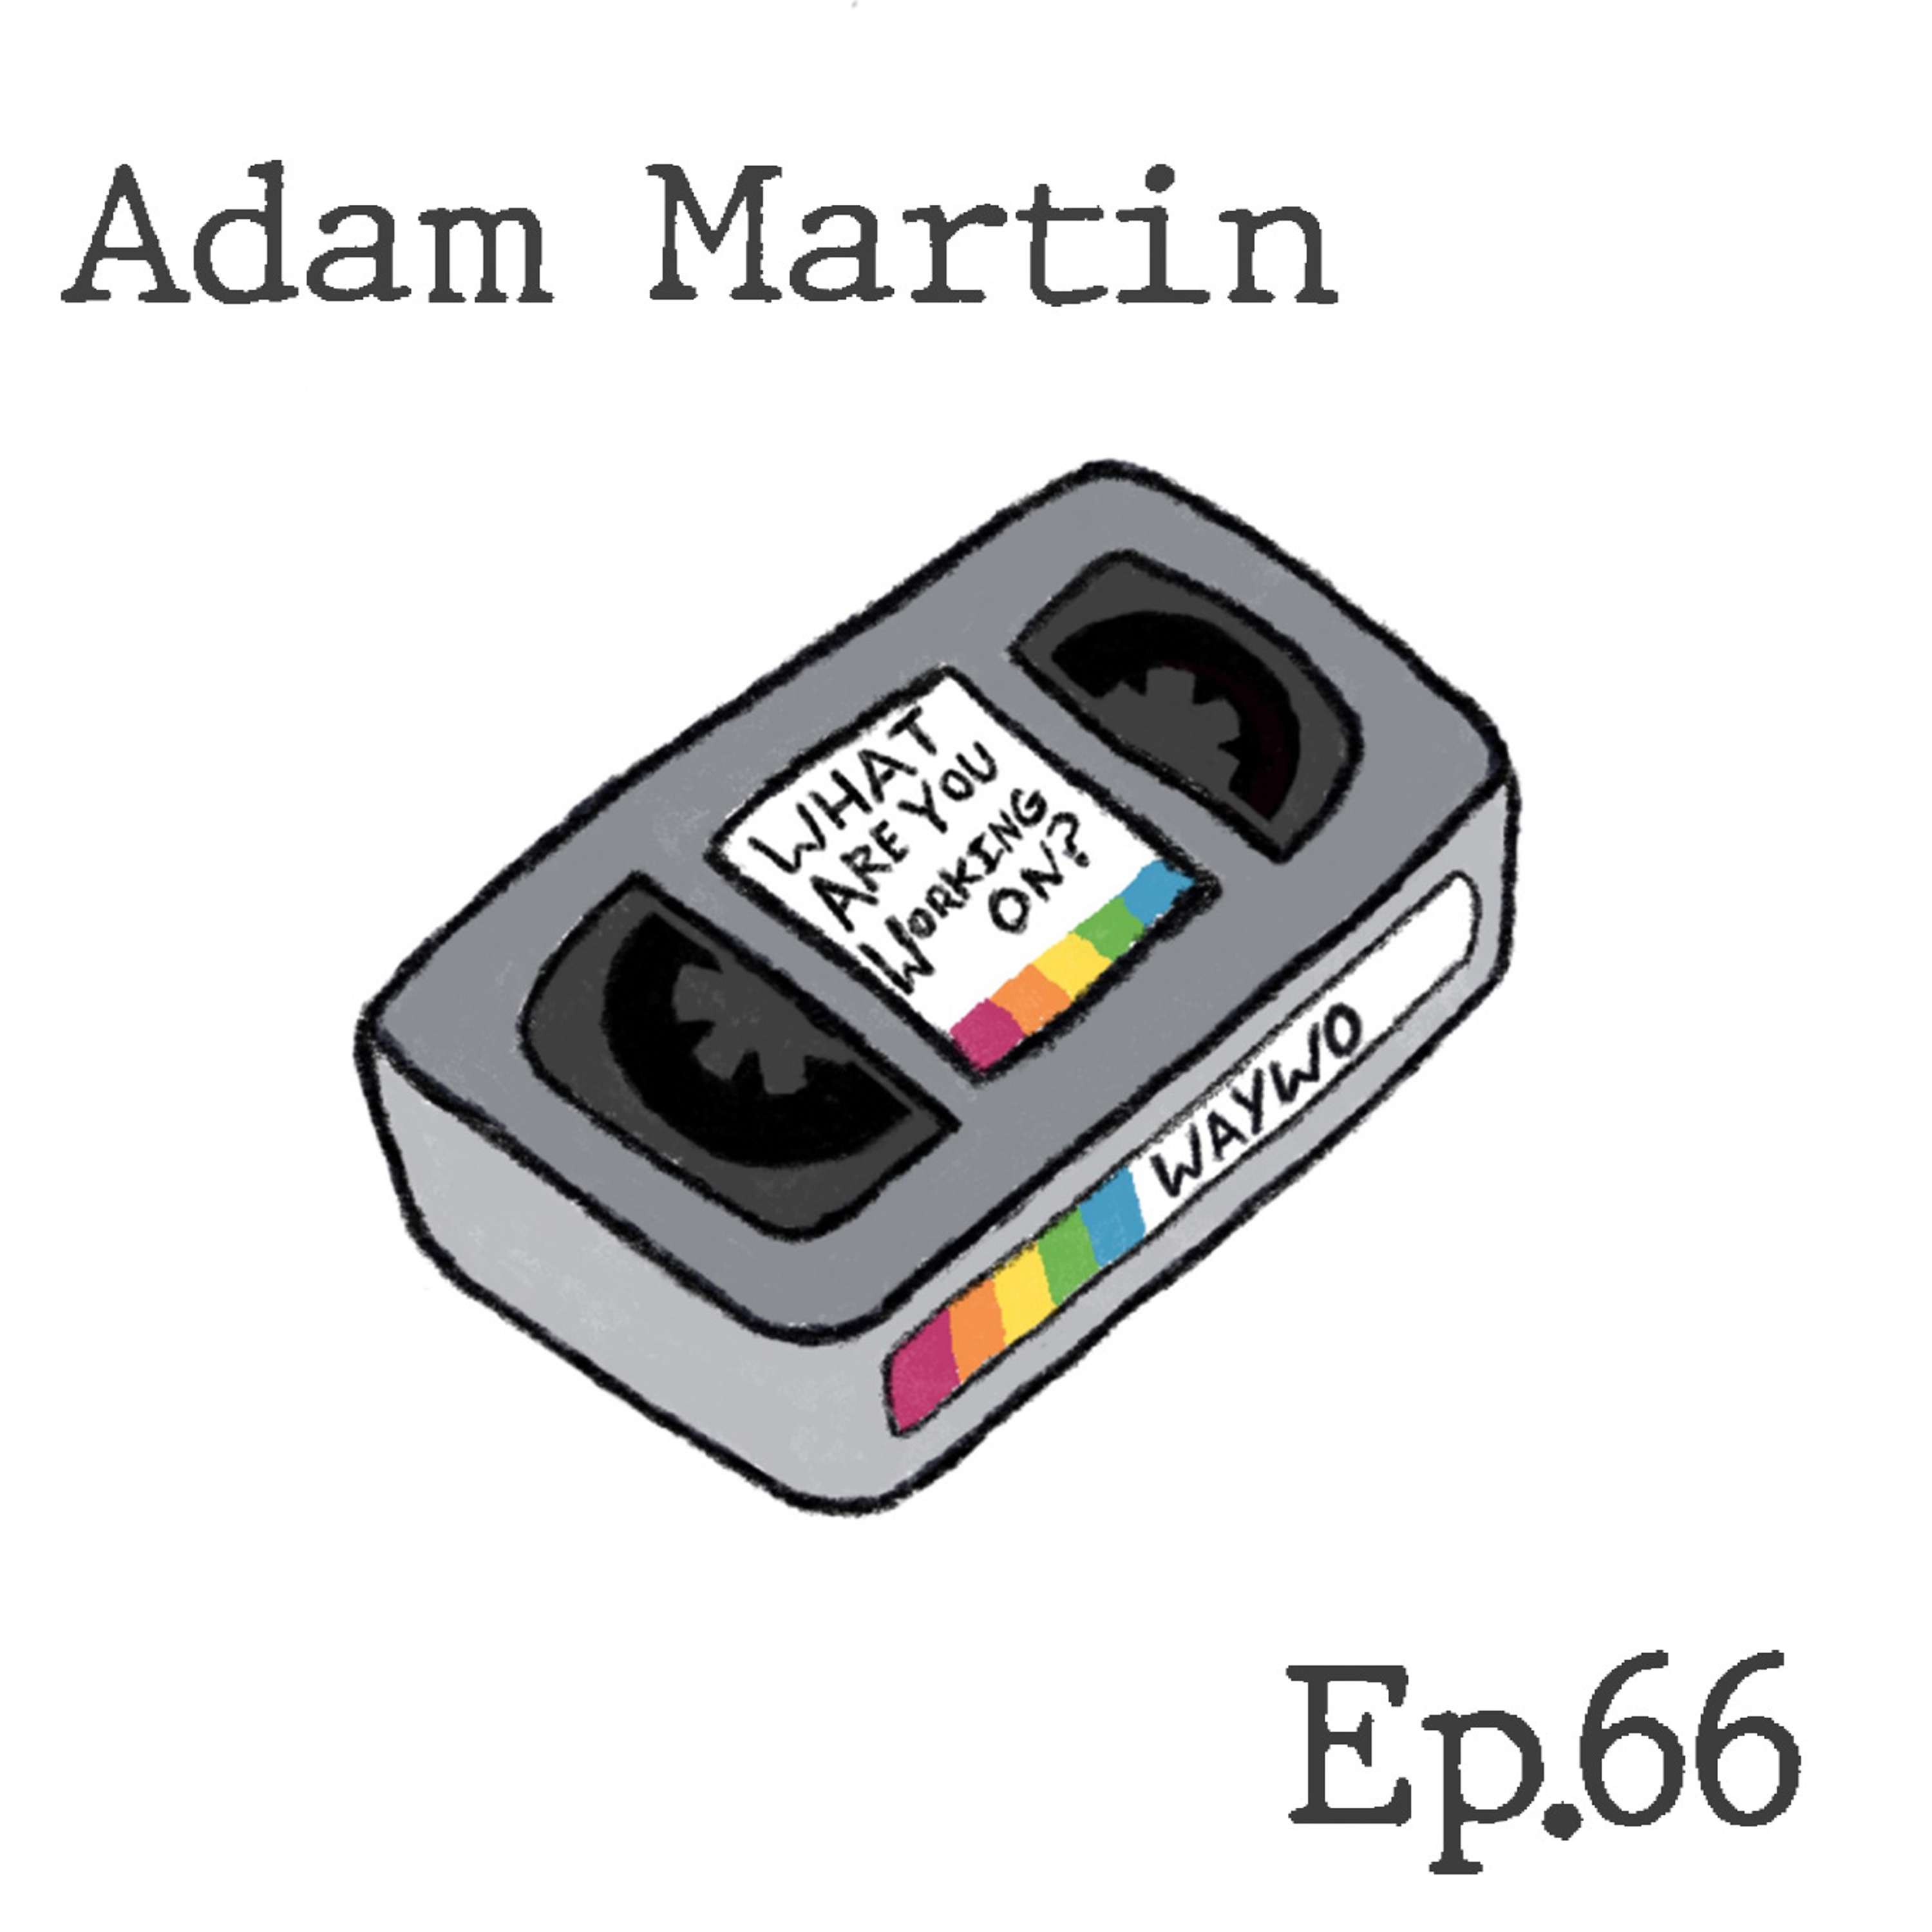 How Adam Martin Went from HBO's Barry to Startup Co-Founder